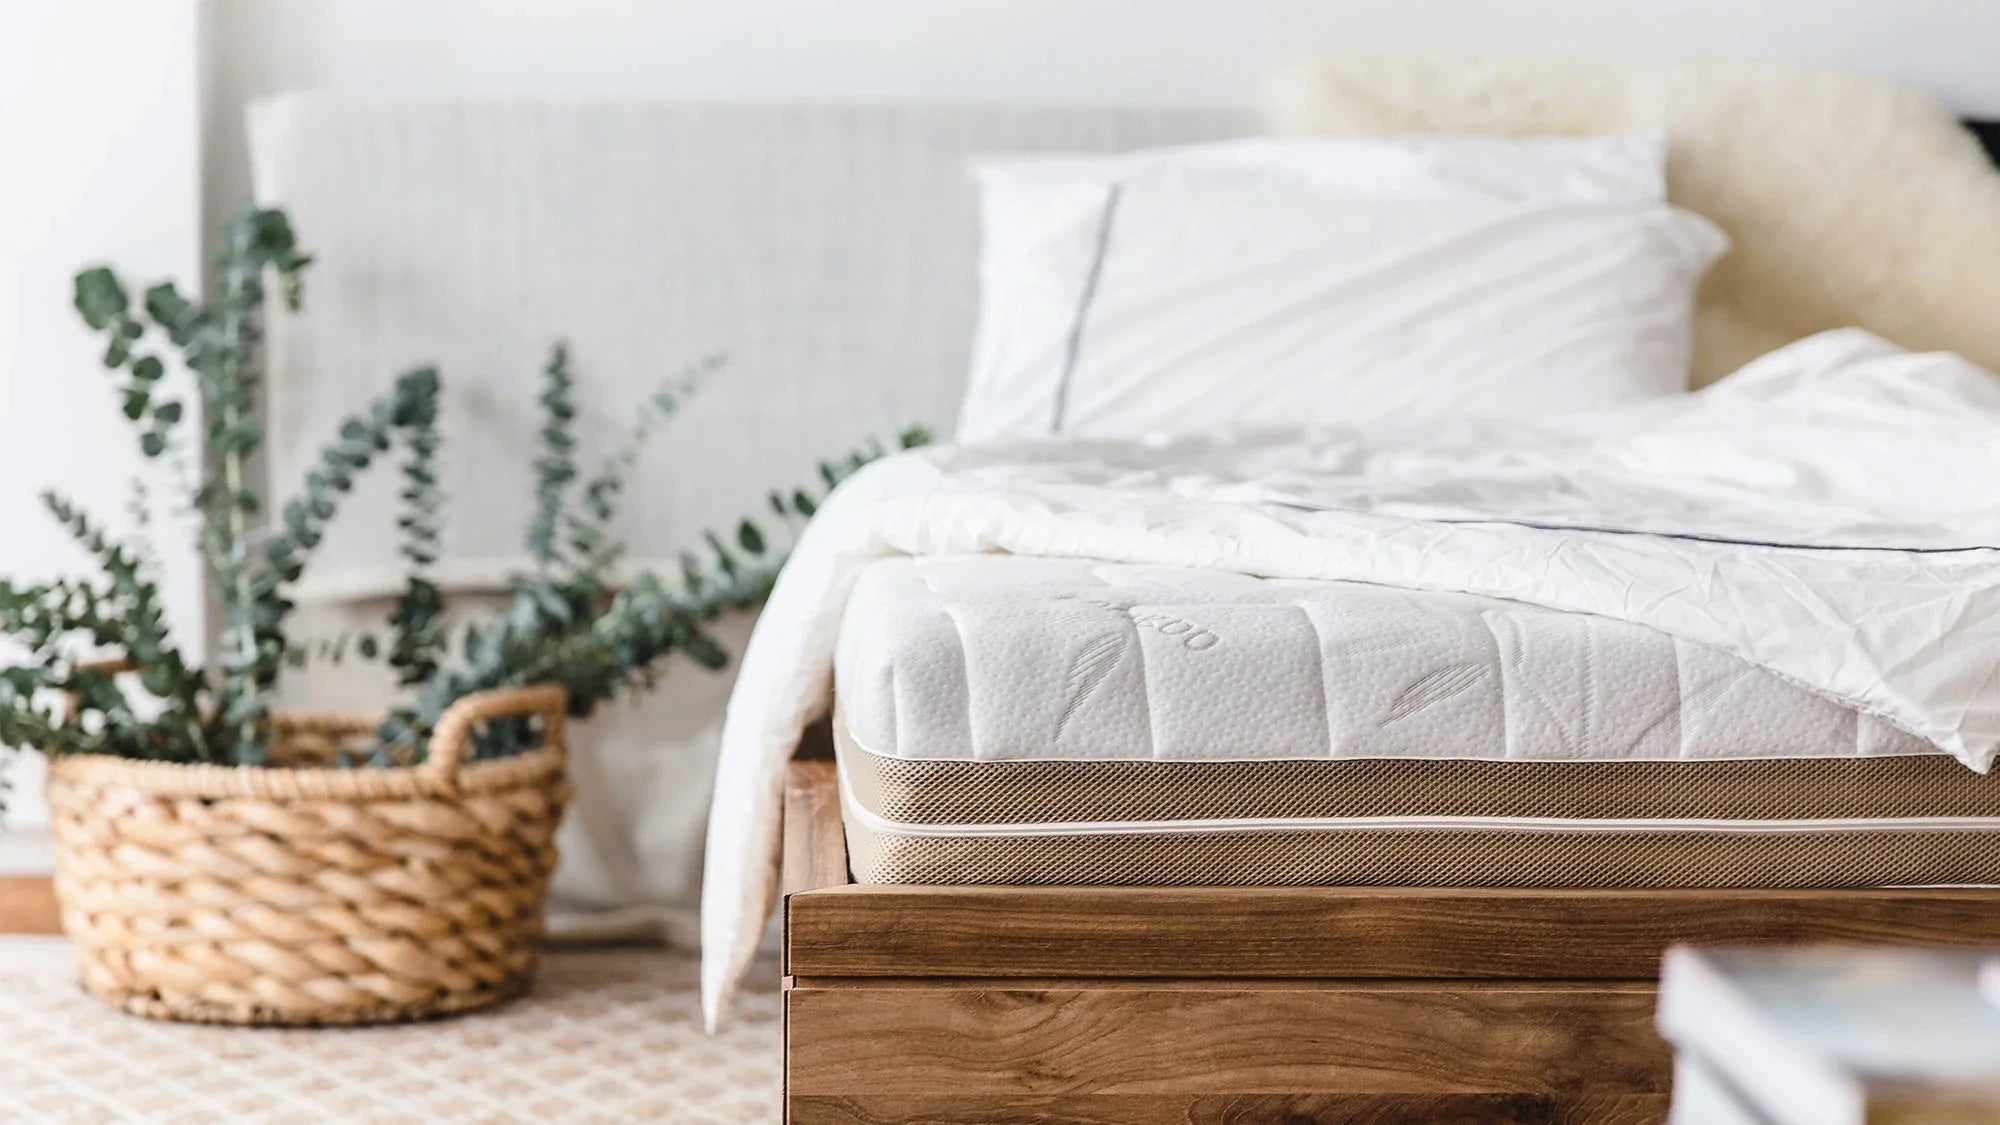 How to Keep Your New Latex Mattress in Tip-top Condition